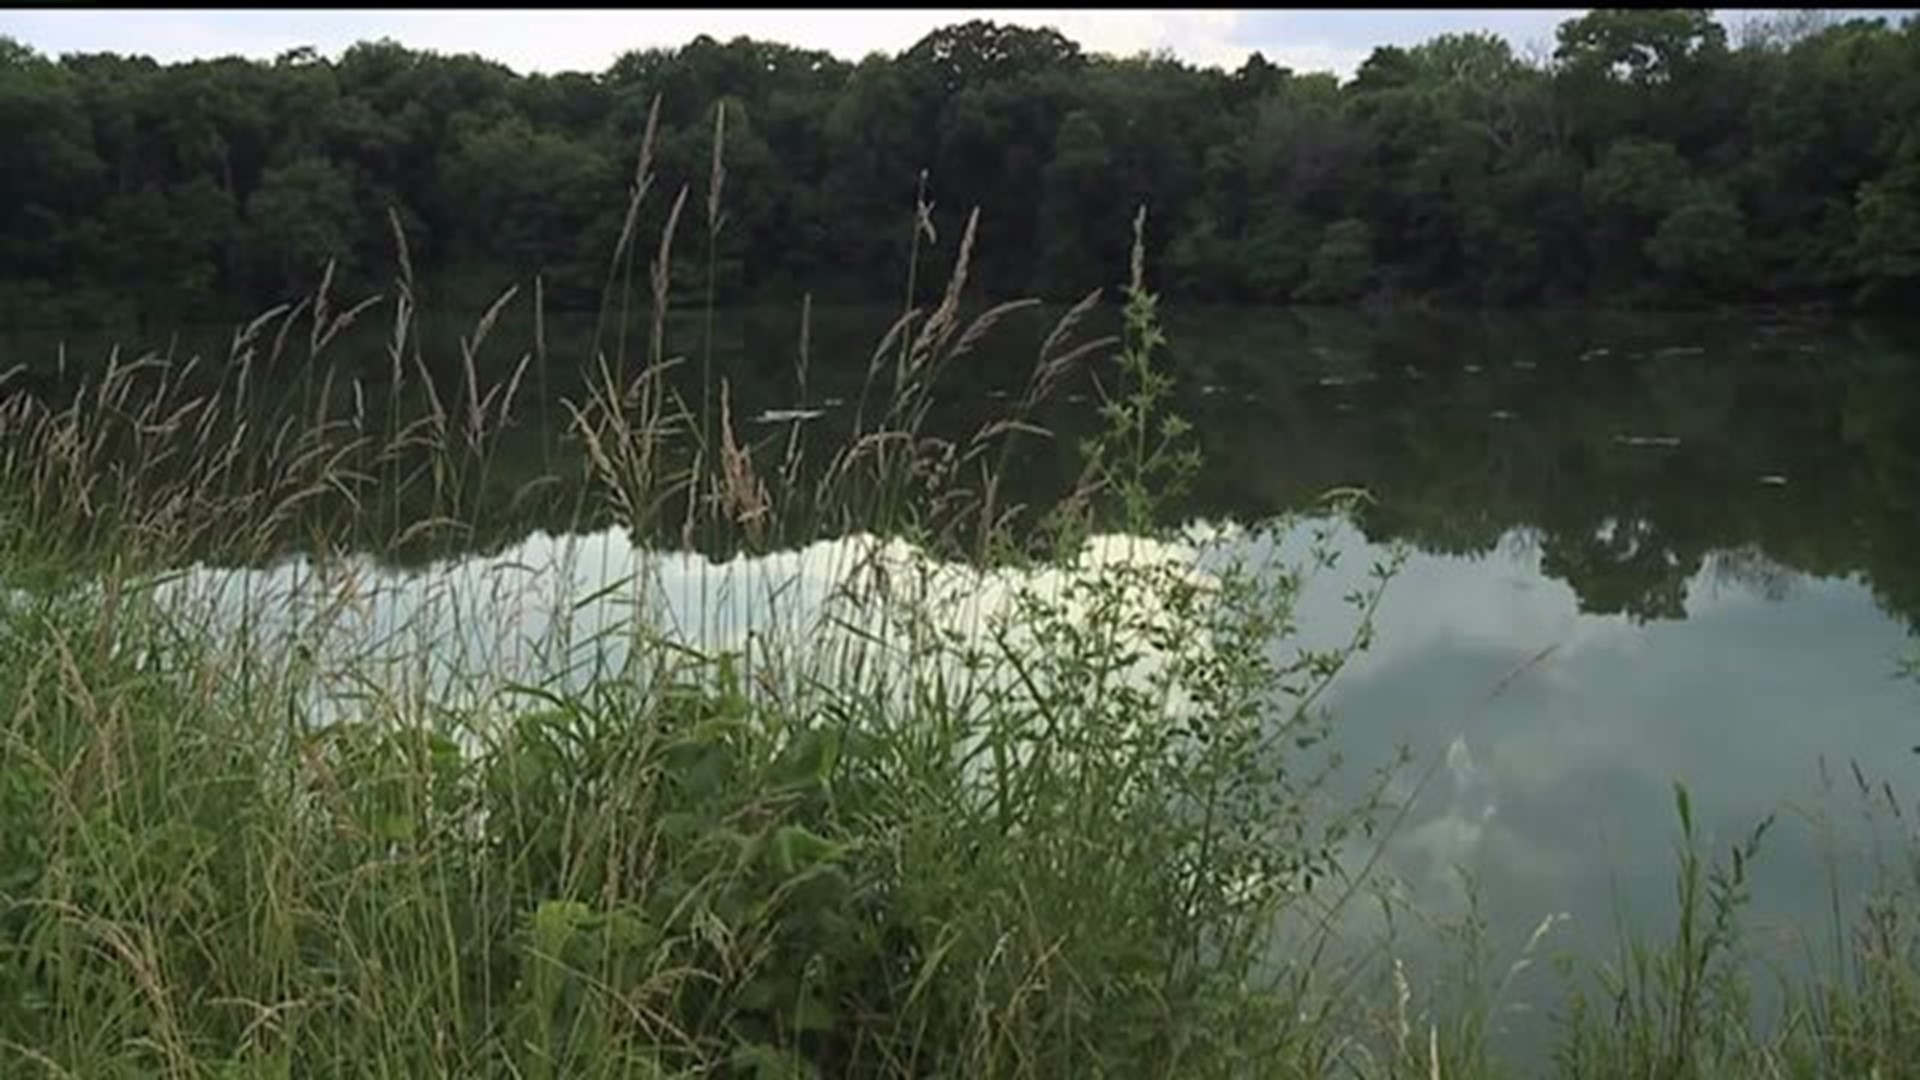 Search still on at Galesburg lake